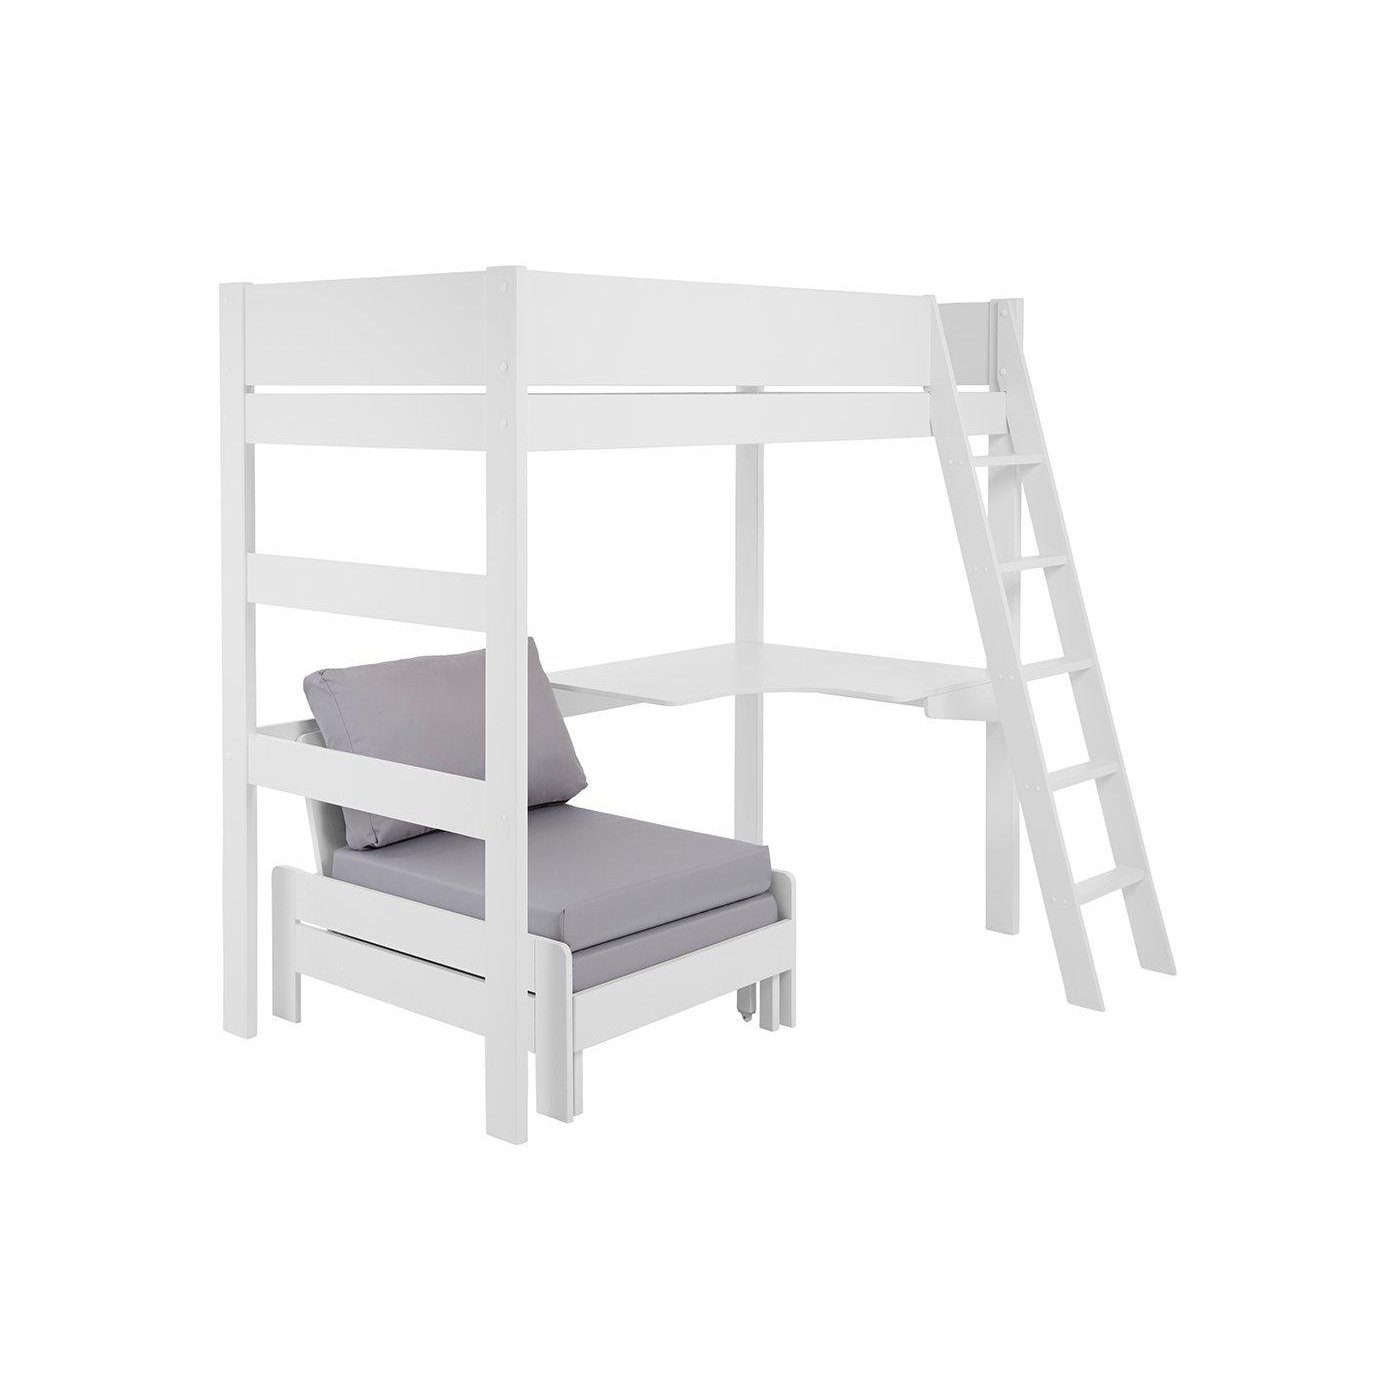 Anderson Desk High Sleeper With Silver Chair - 3'0 Single - White